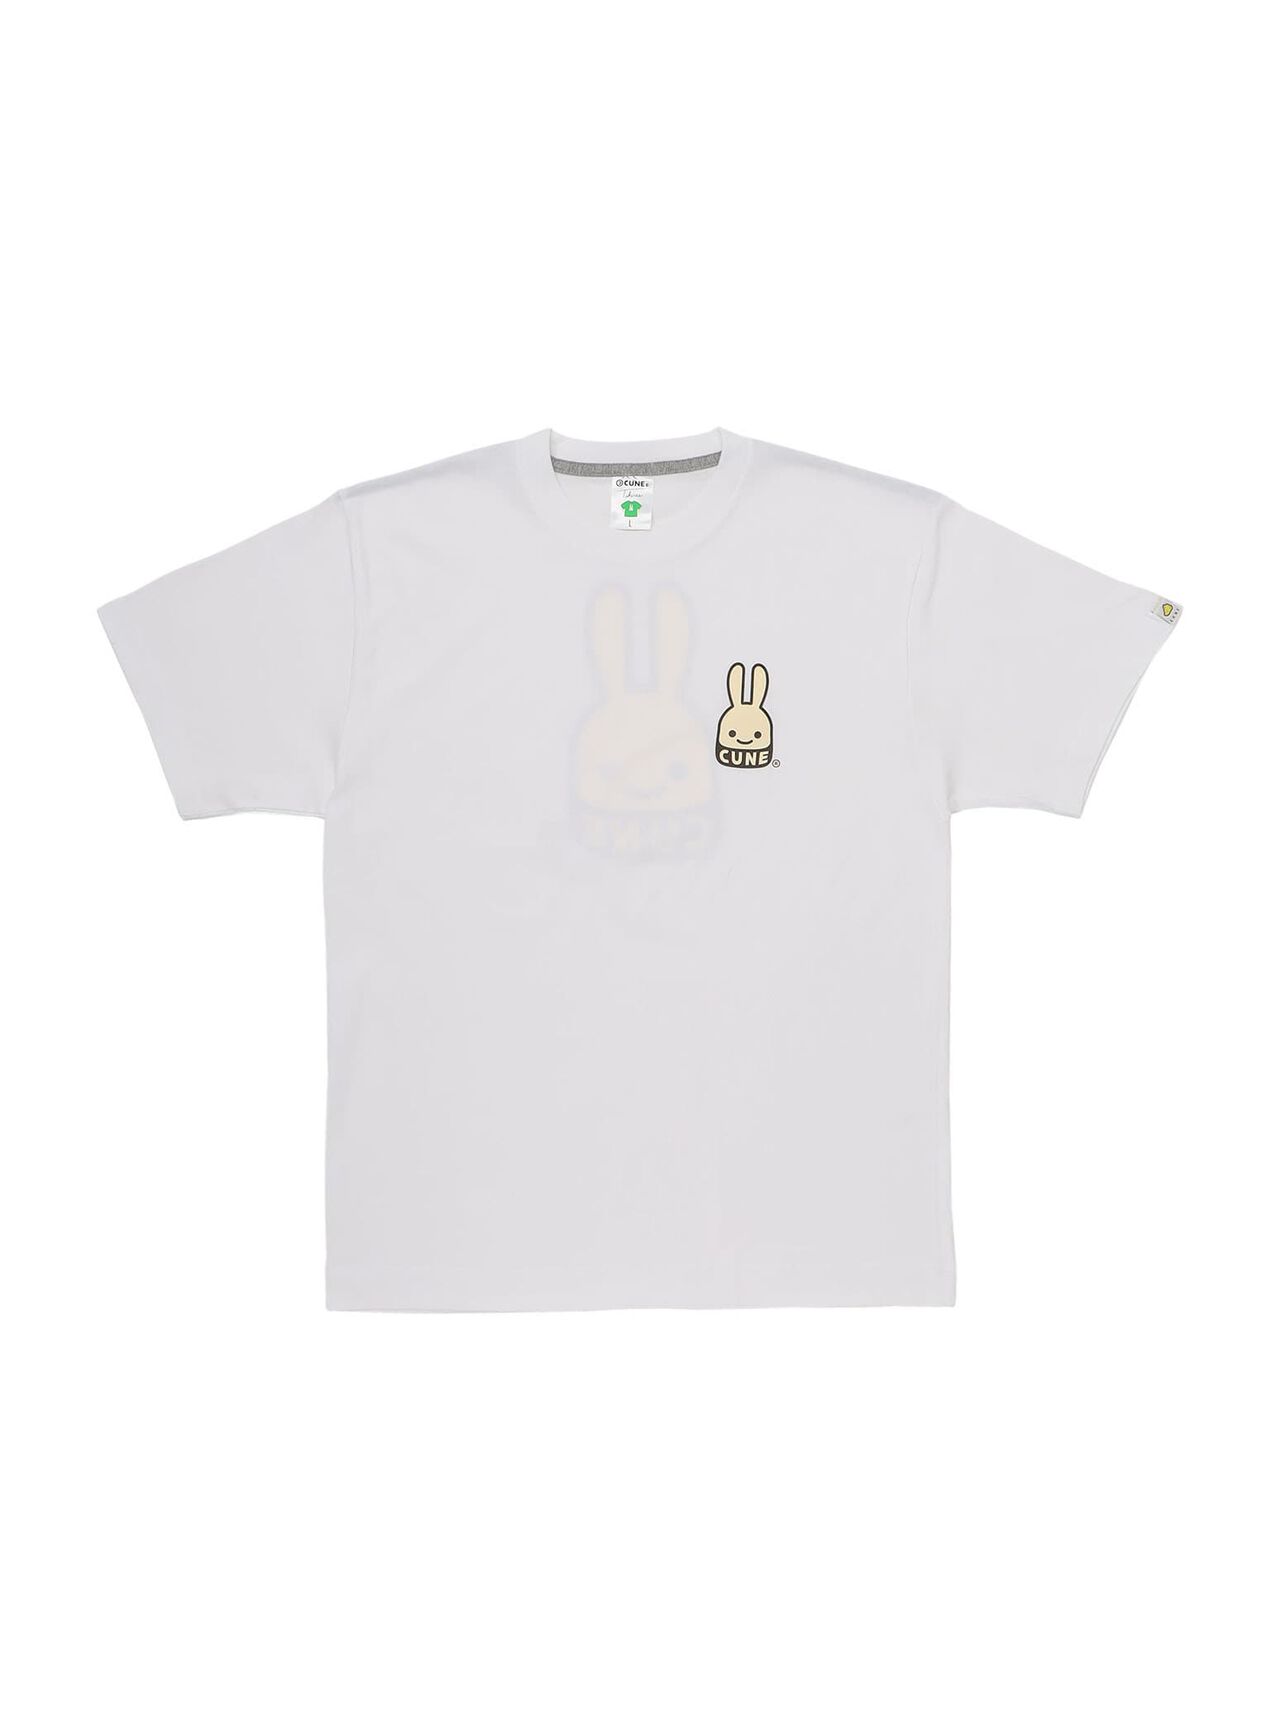 S/S Tee CUNE Rabbit,L, large image number 0